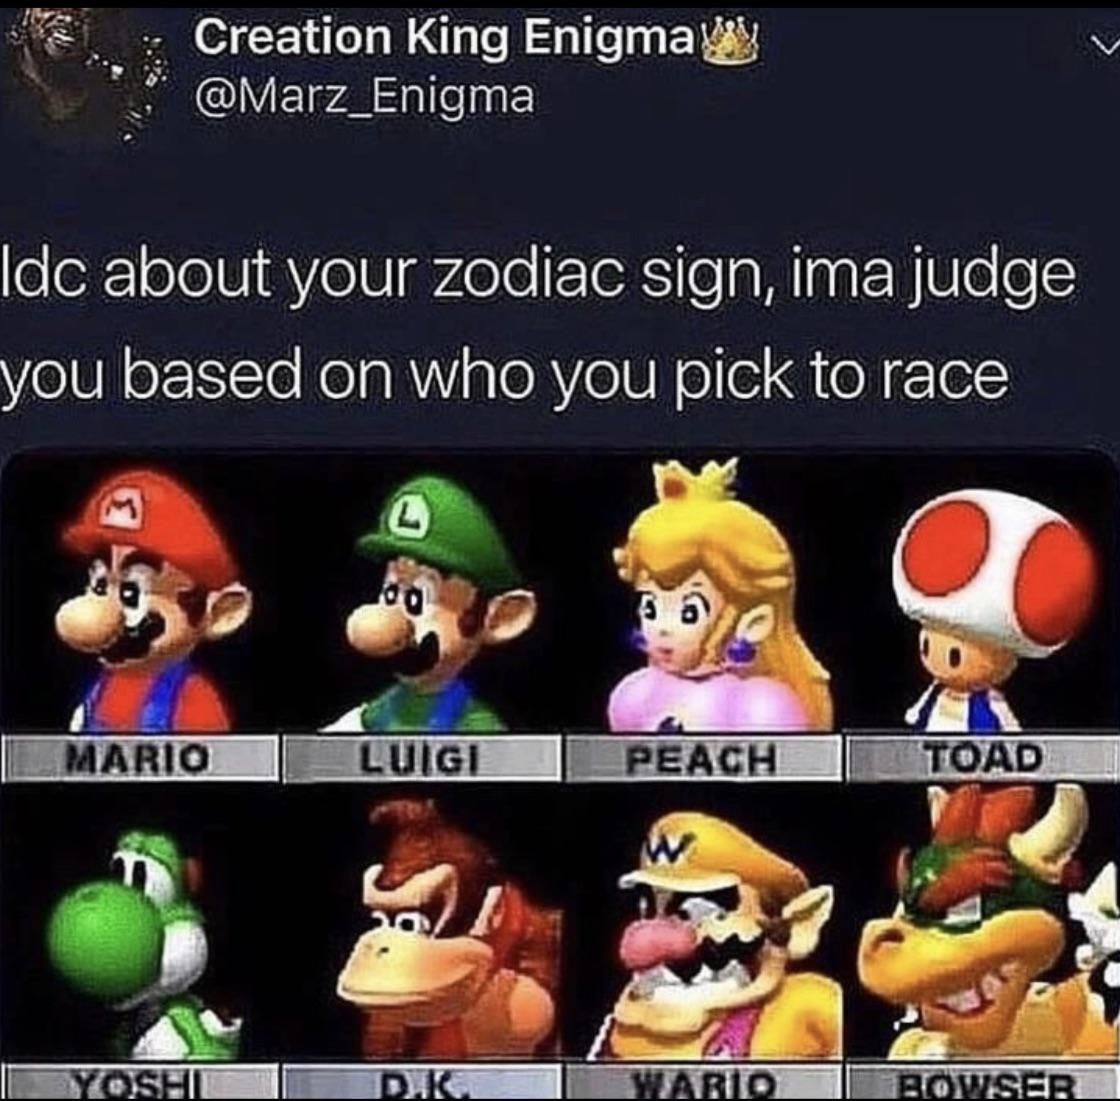 toad for me